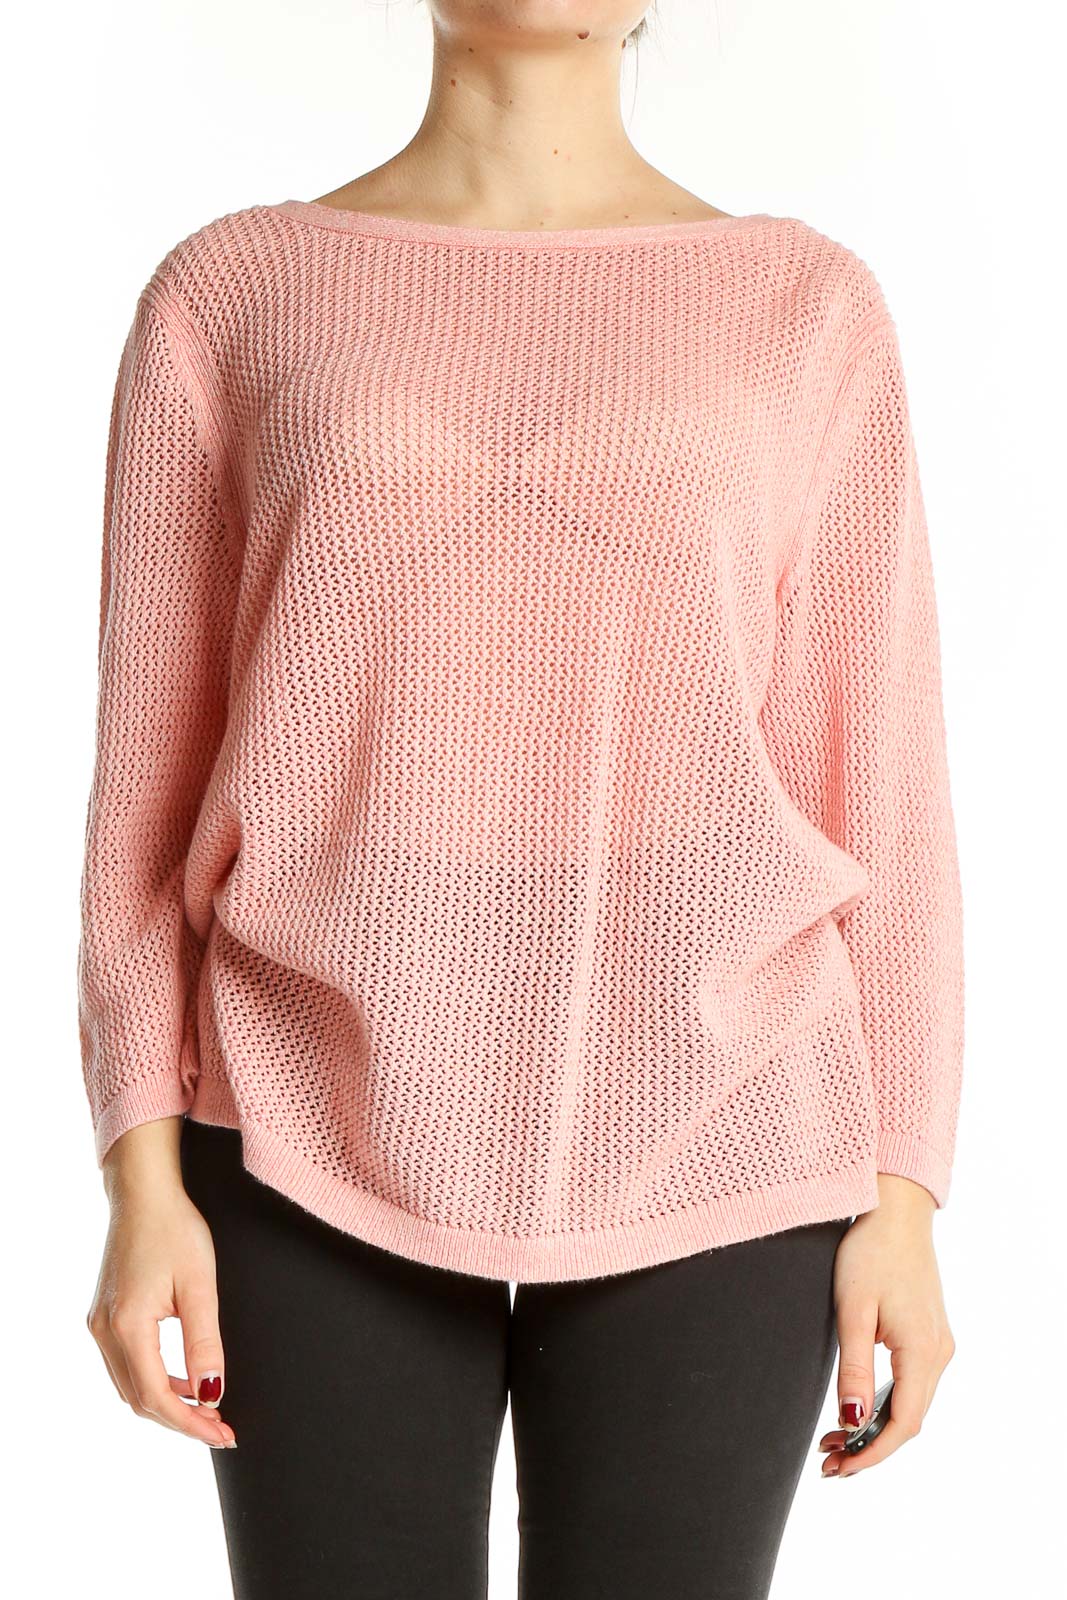 Pink Texture Sweater Front